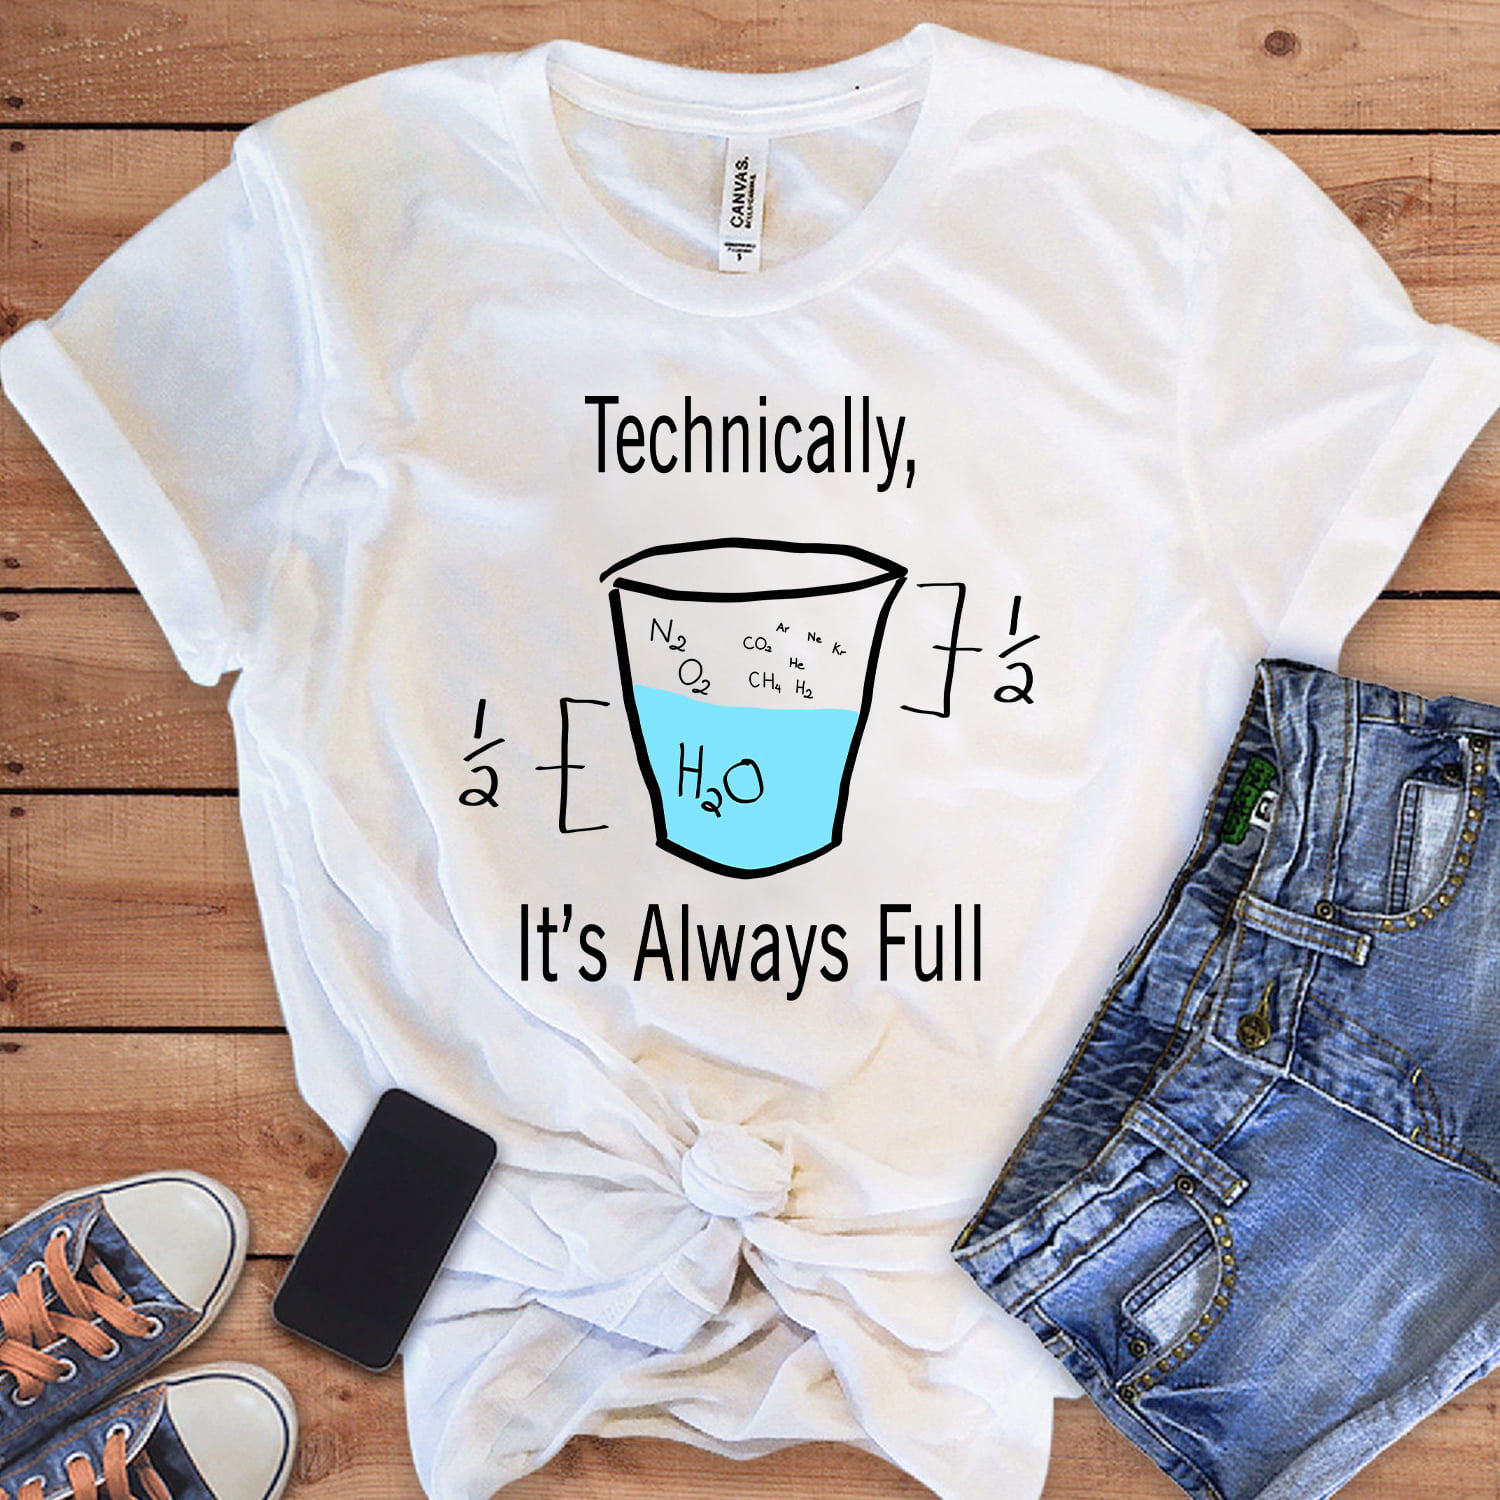 Technically, it's always full - Half of a cup, cup of water